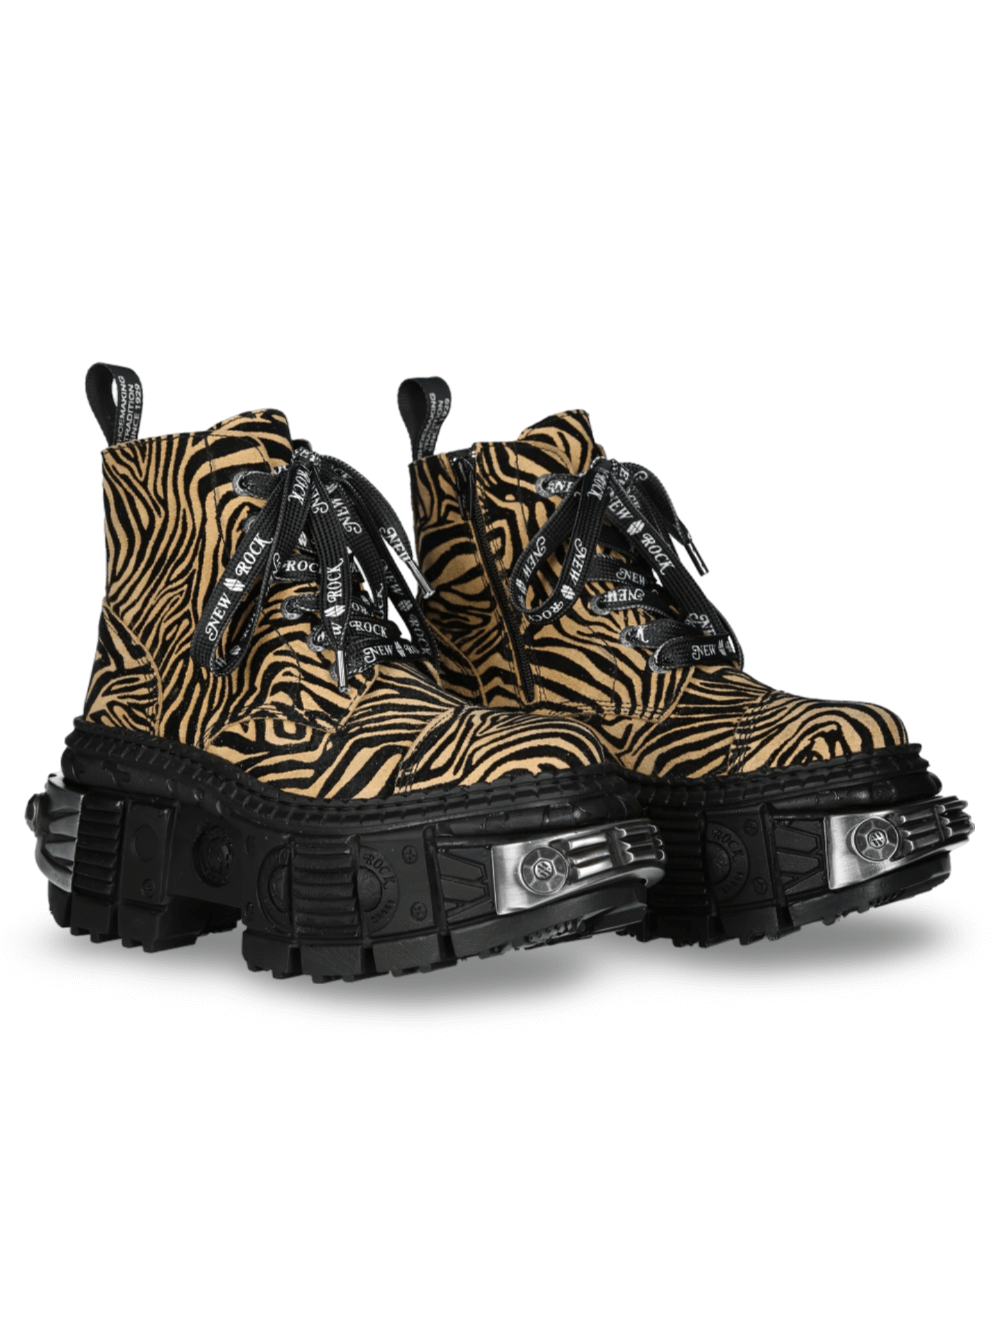 NEW ROCK Tiger Print Ankle Boots with Rugged Sole